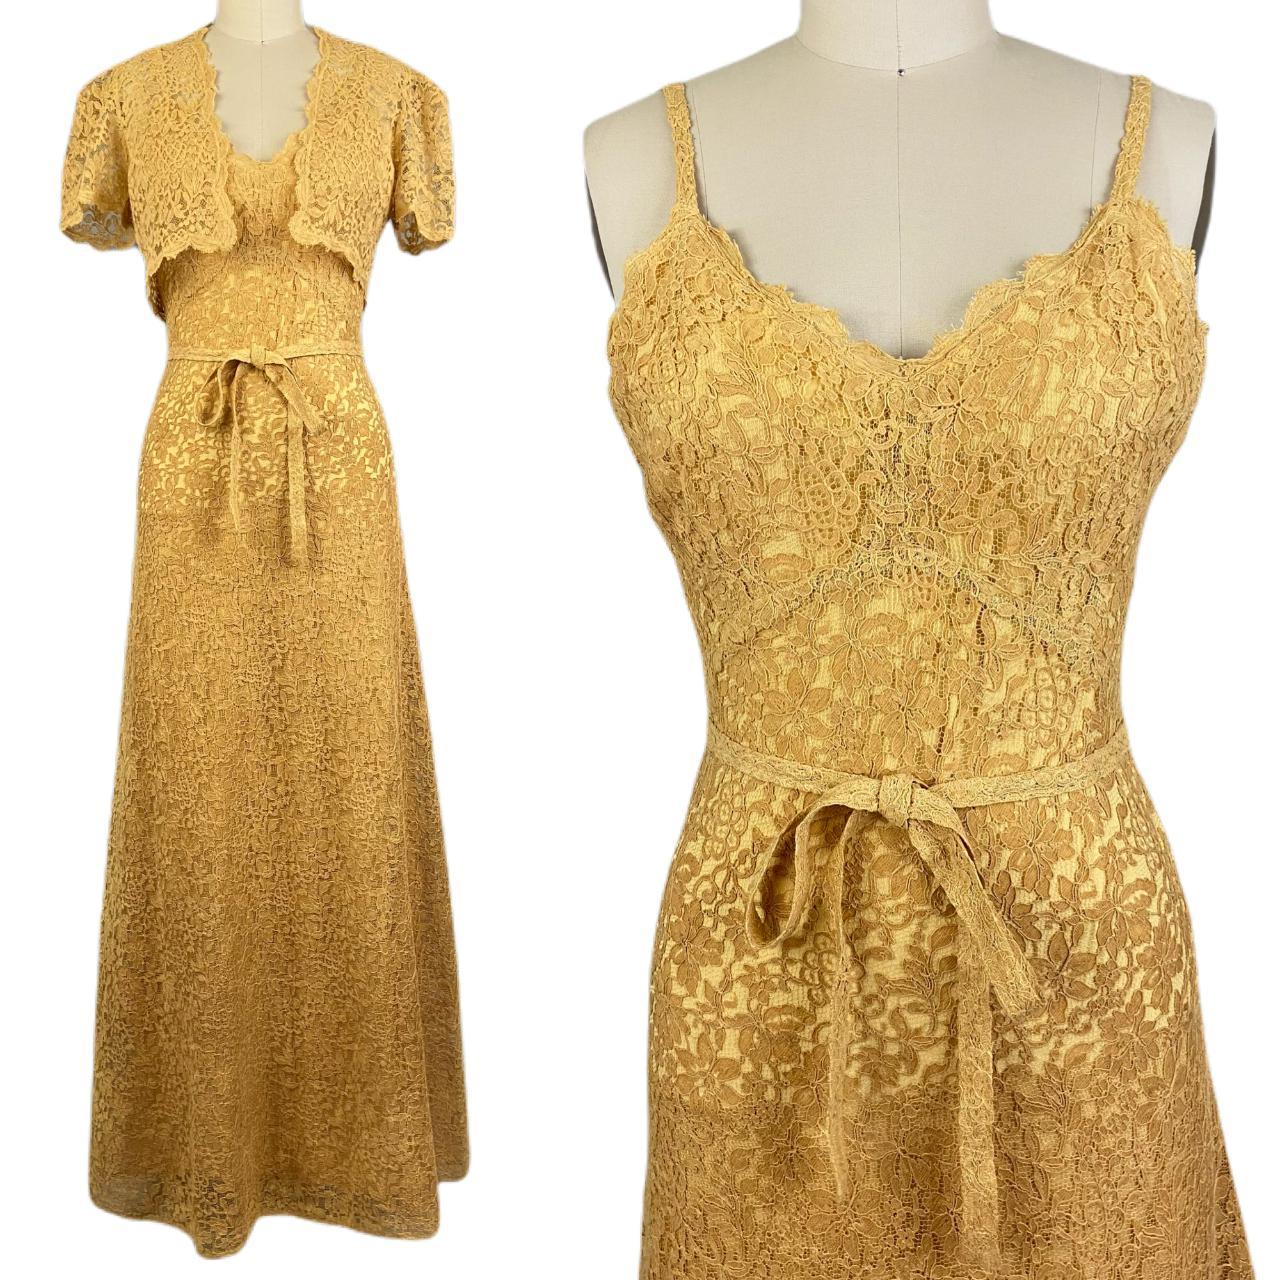 Product Image 1 - Incredible vintage 1930s golden yellow